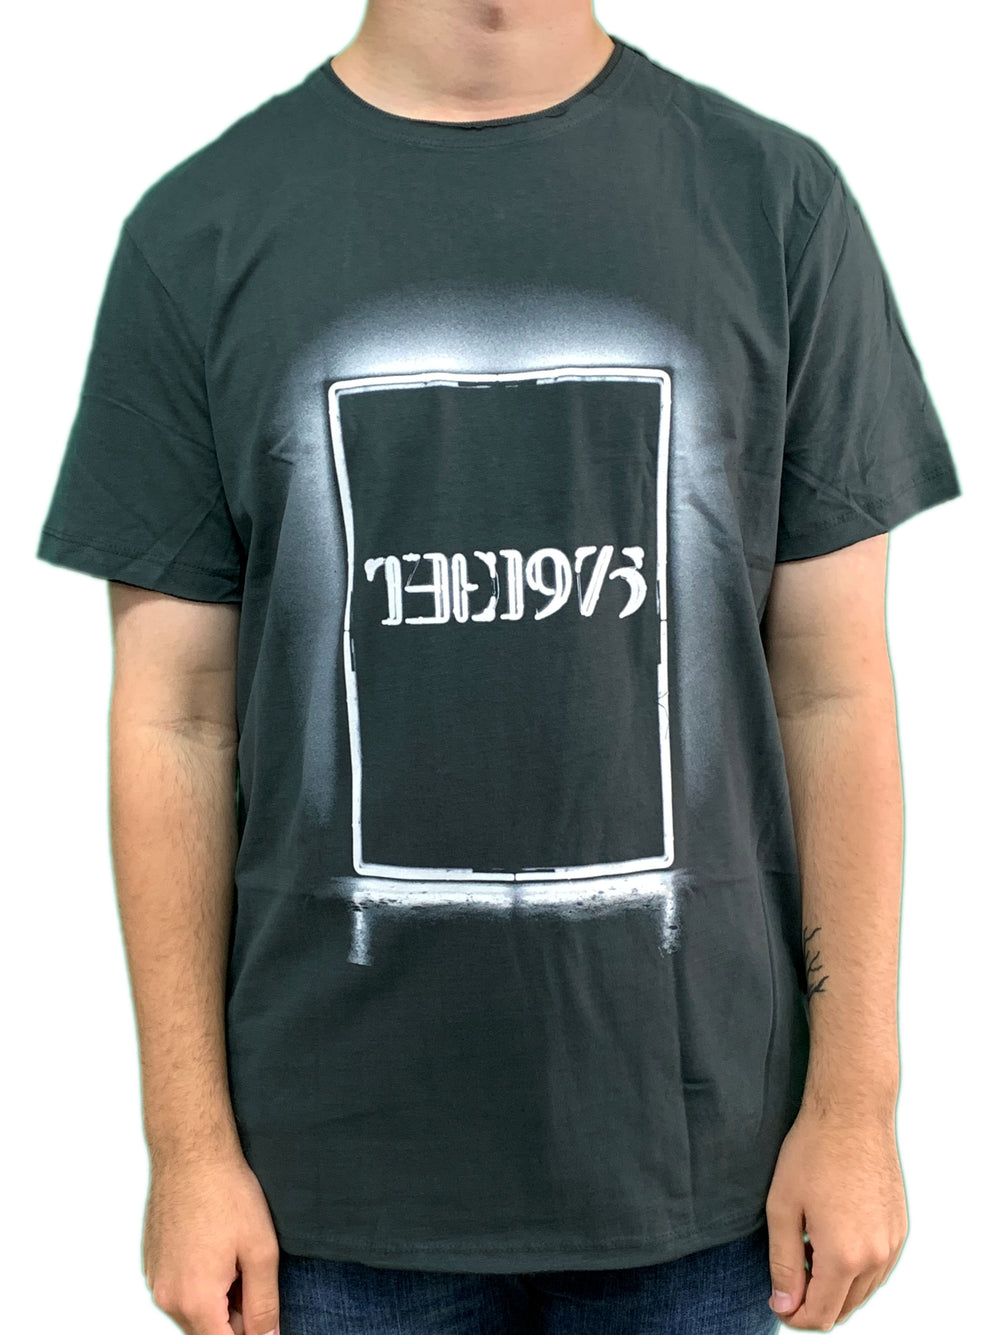 The 1975 Neon Seven Five Amplified Unisex Official T Shirt Brand New Various Sizes